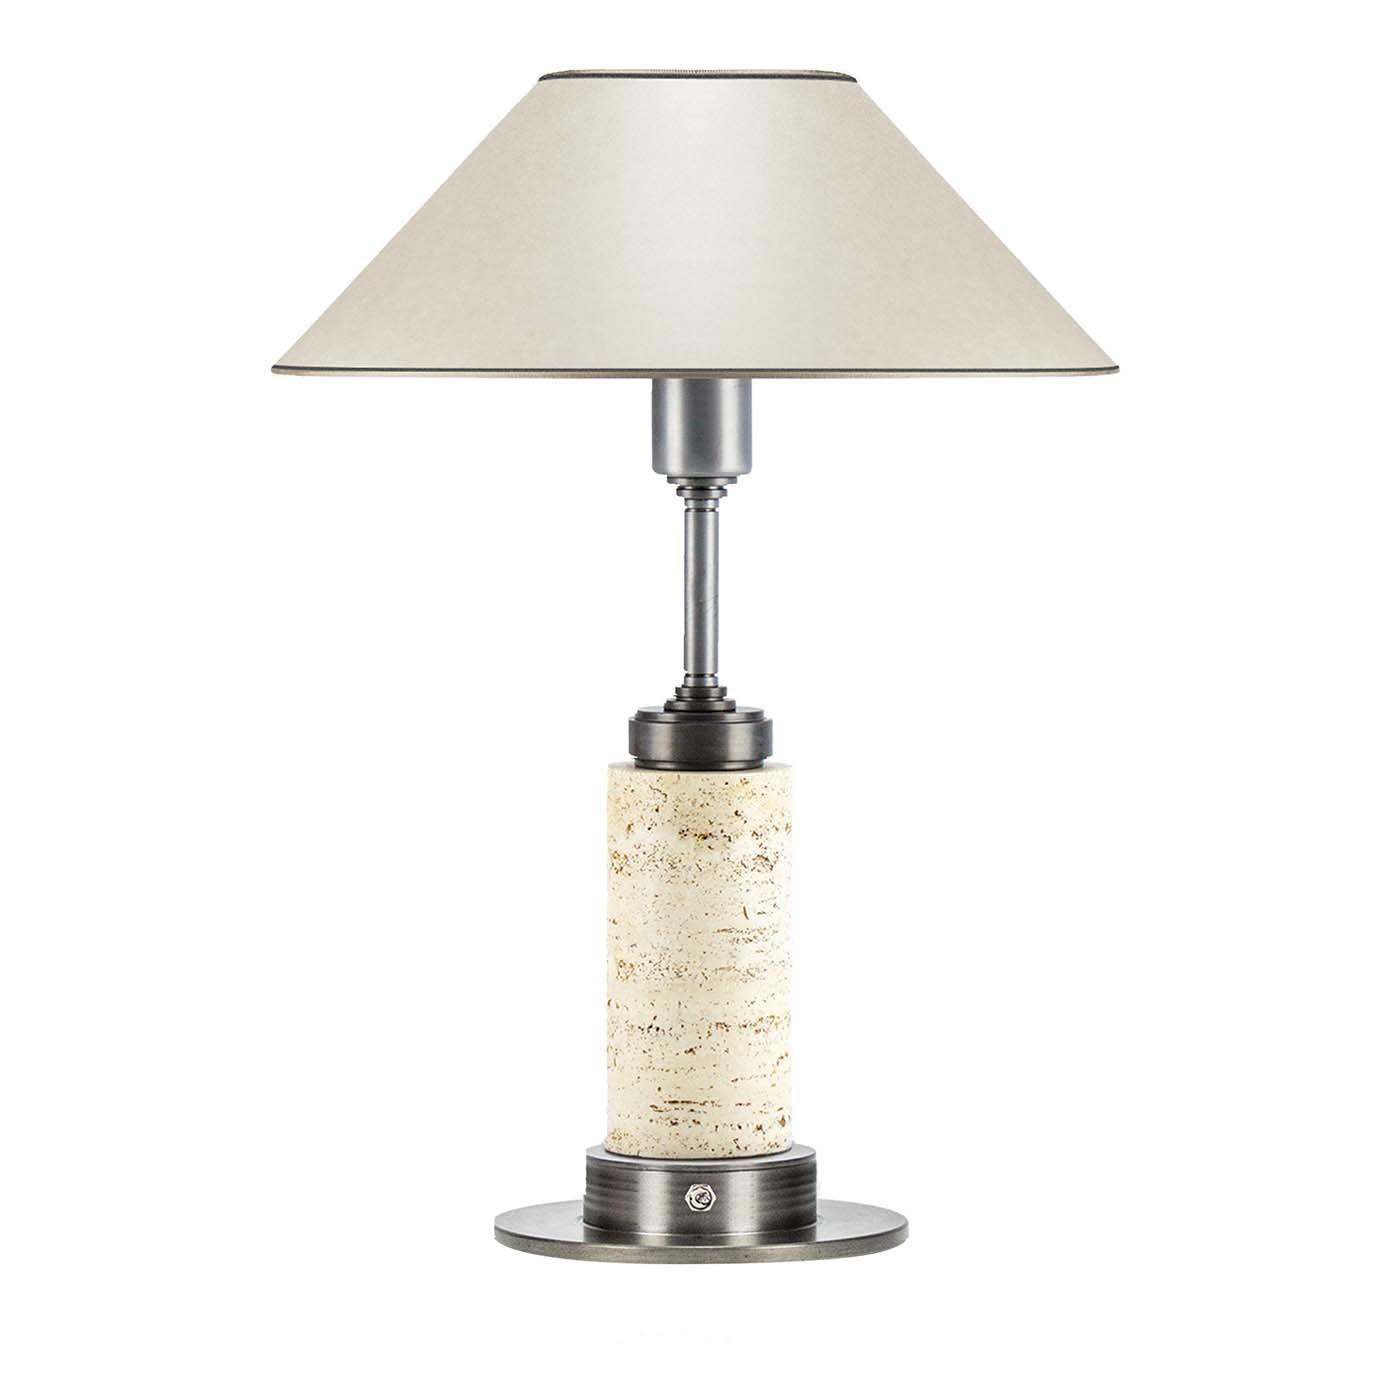 Prized travertine framing the steel structure of this refined abat-jour adds a glamorous look that is sure to steal the show on side tables, desks, and nightstands. Entirely handcrafted, this lighting fixture features a small, circular base and a